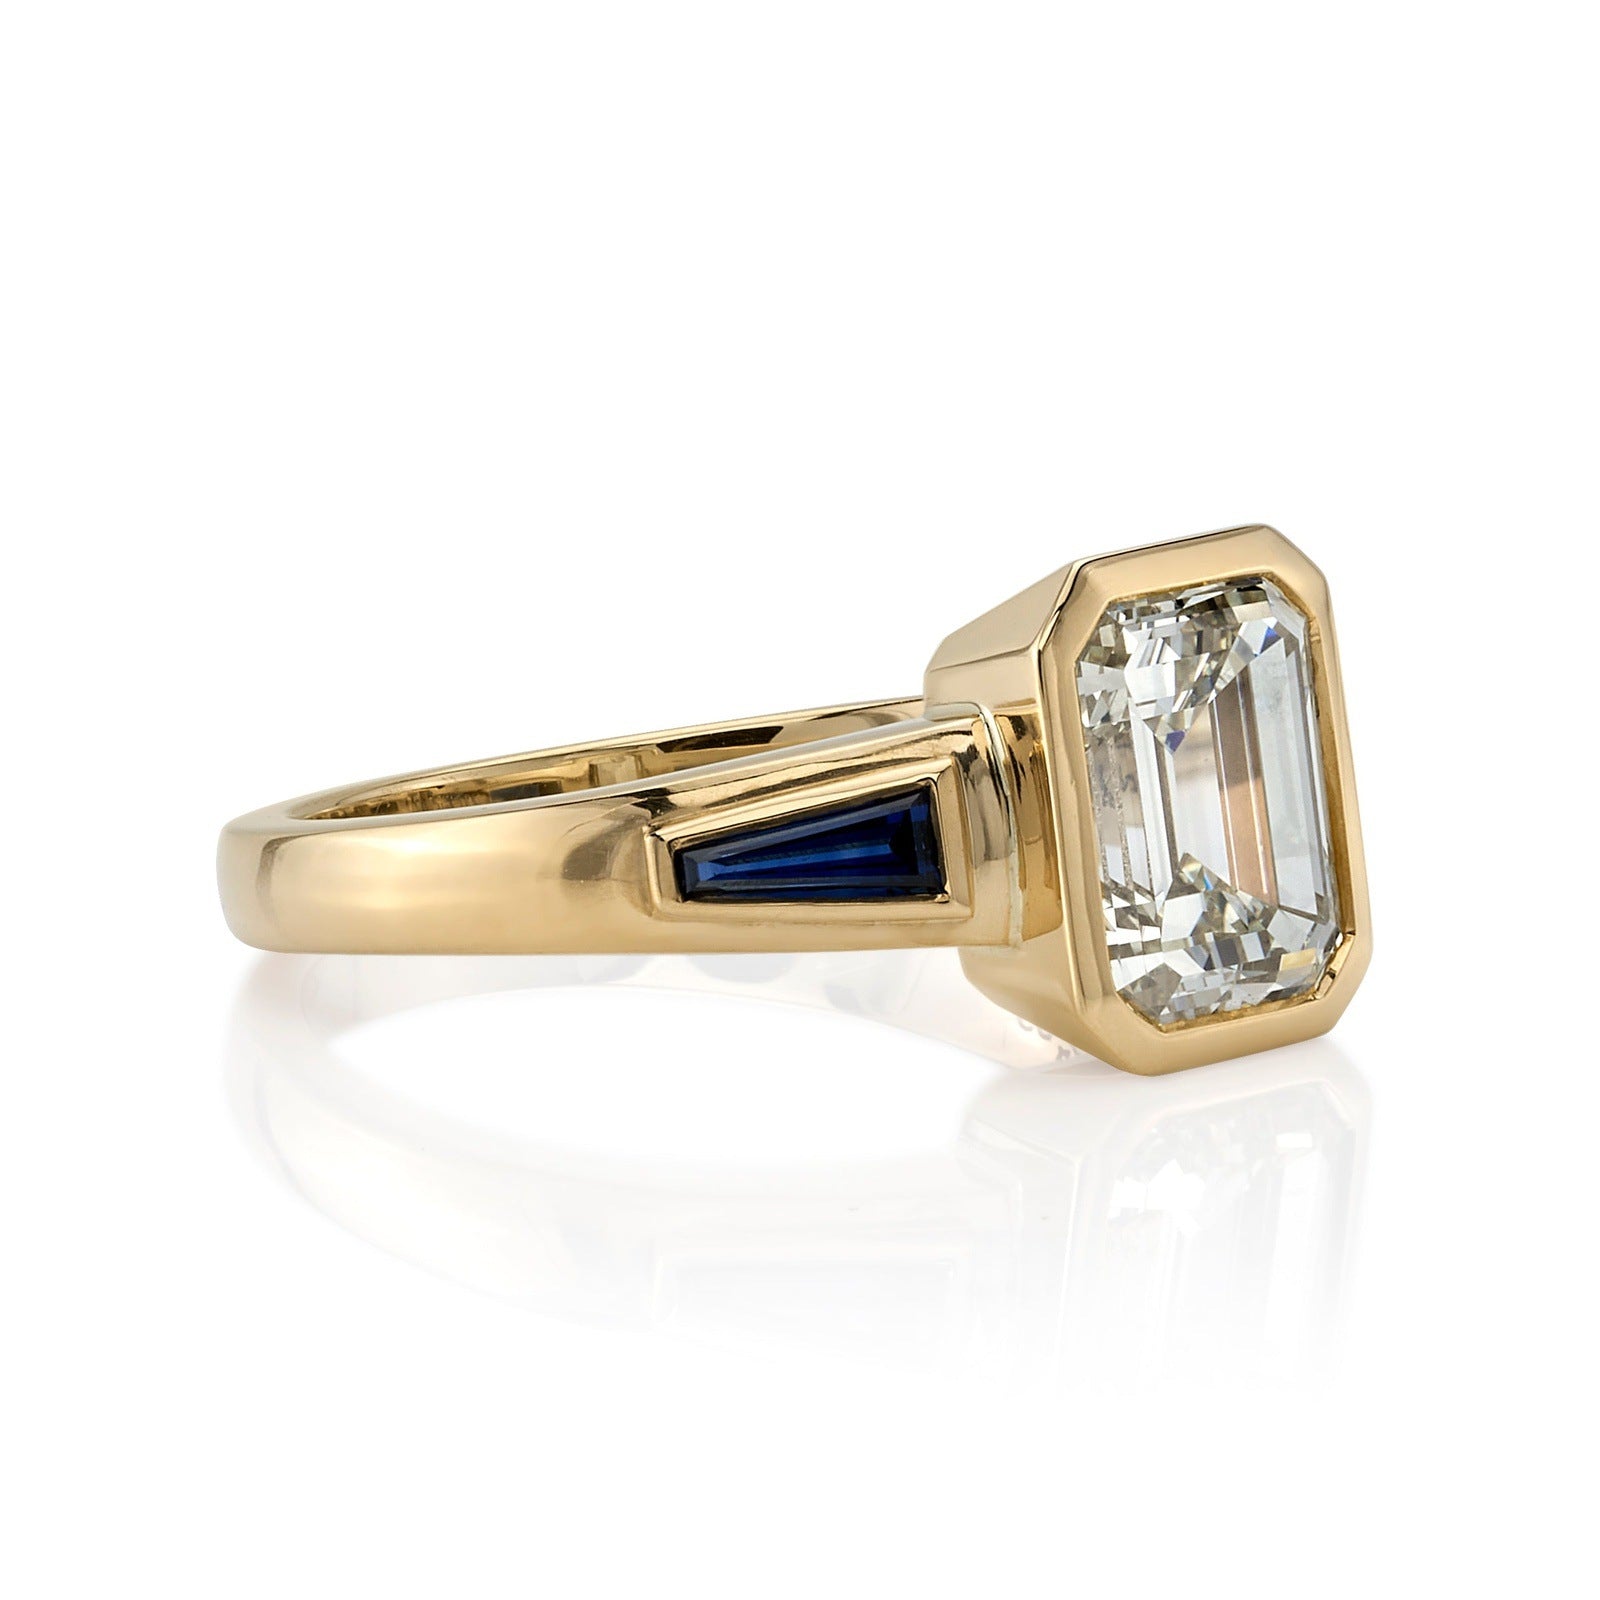 SINGLE STONE LAURIE RING featuring 2.09ct U-V/VS1 GIA certified emerald cut diamond with 0.73ctw baguette cut blue sapphire accents bezel set in a handcrafted 18K yellow gold mounting.